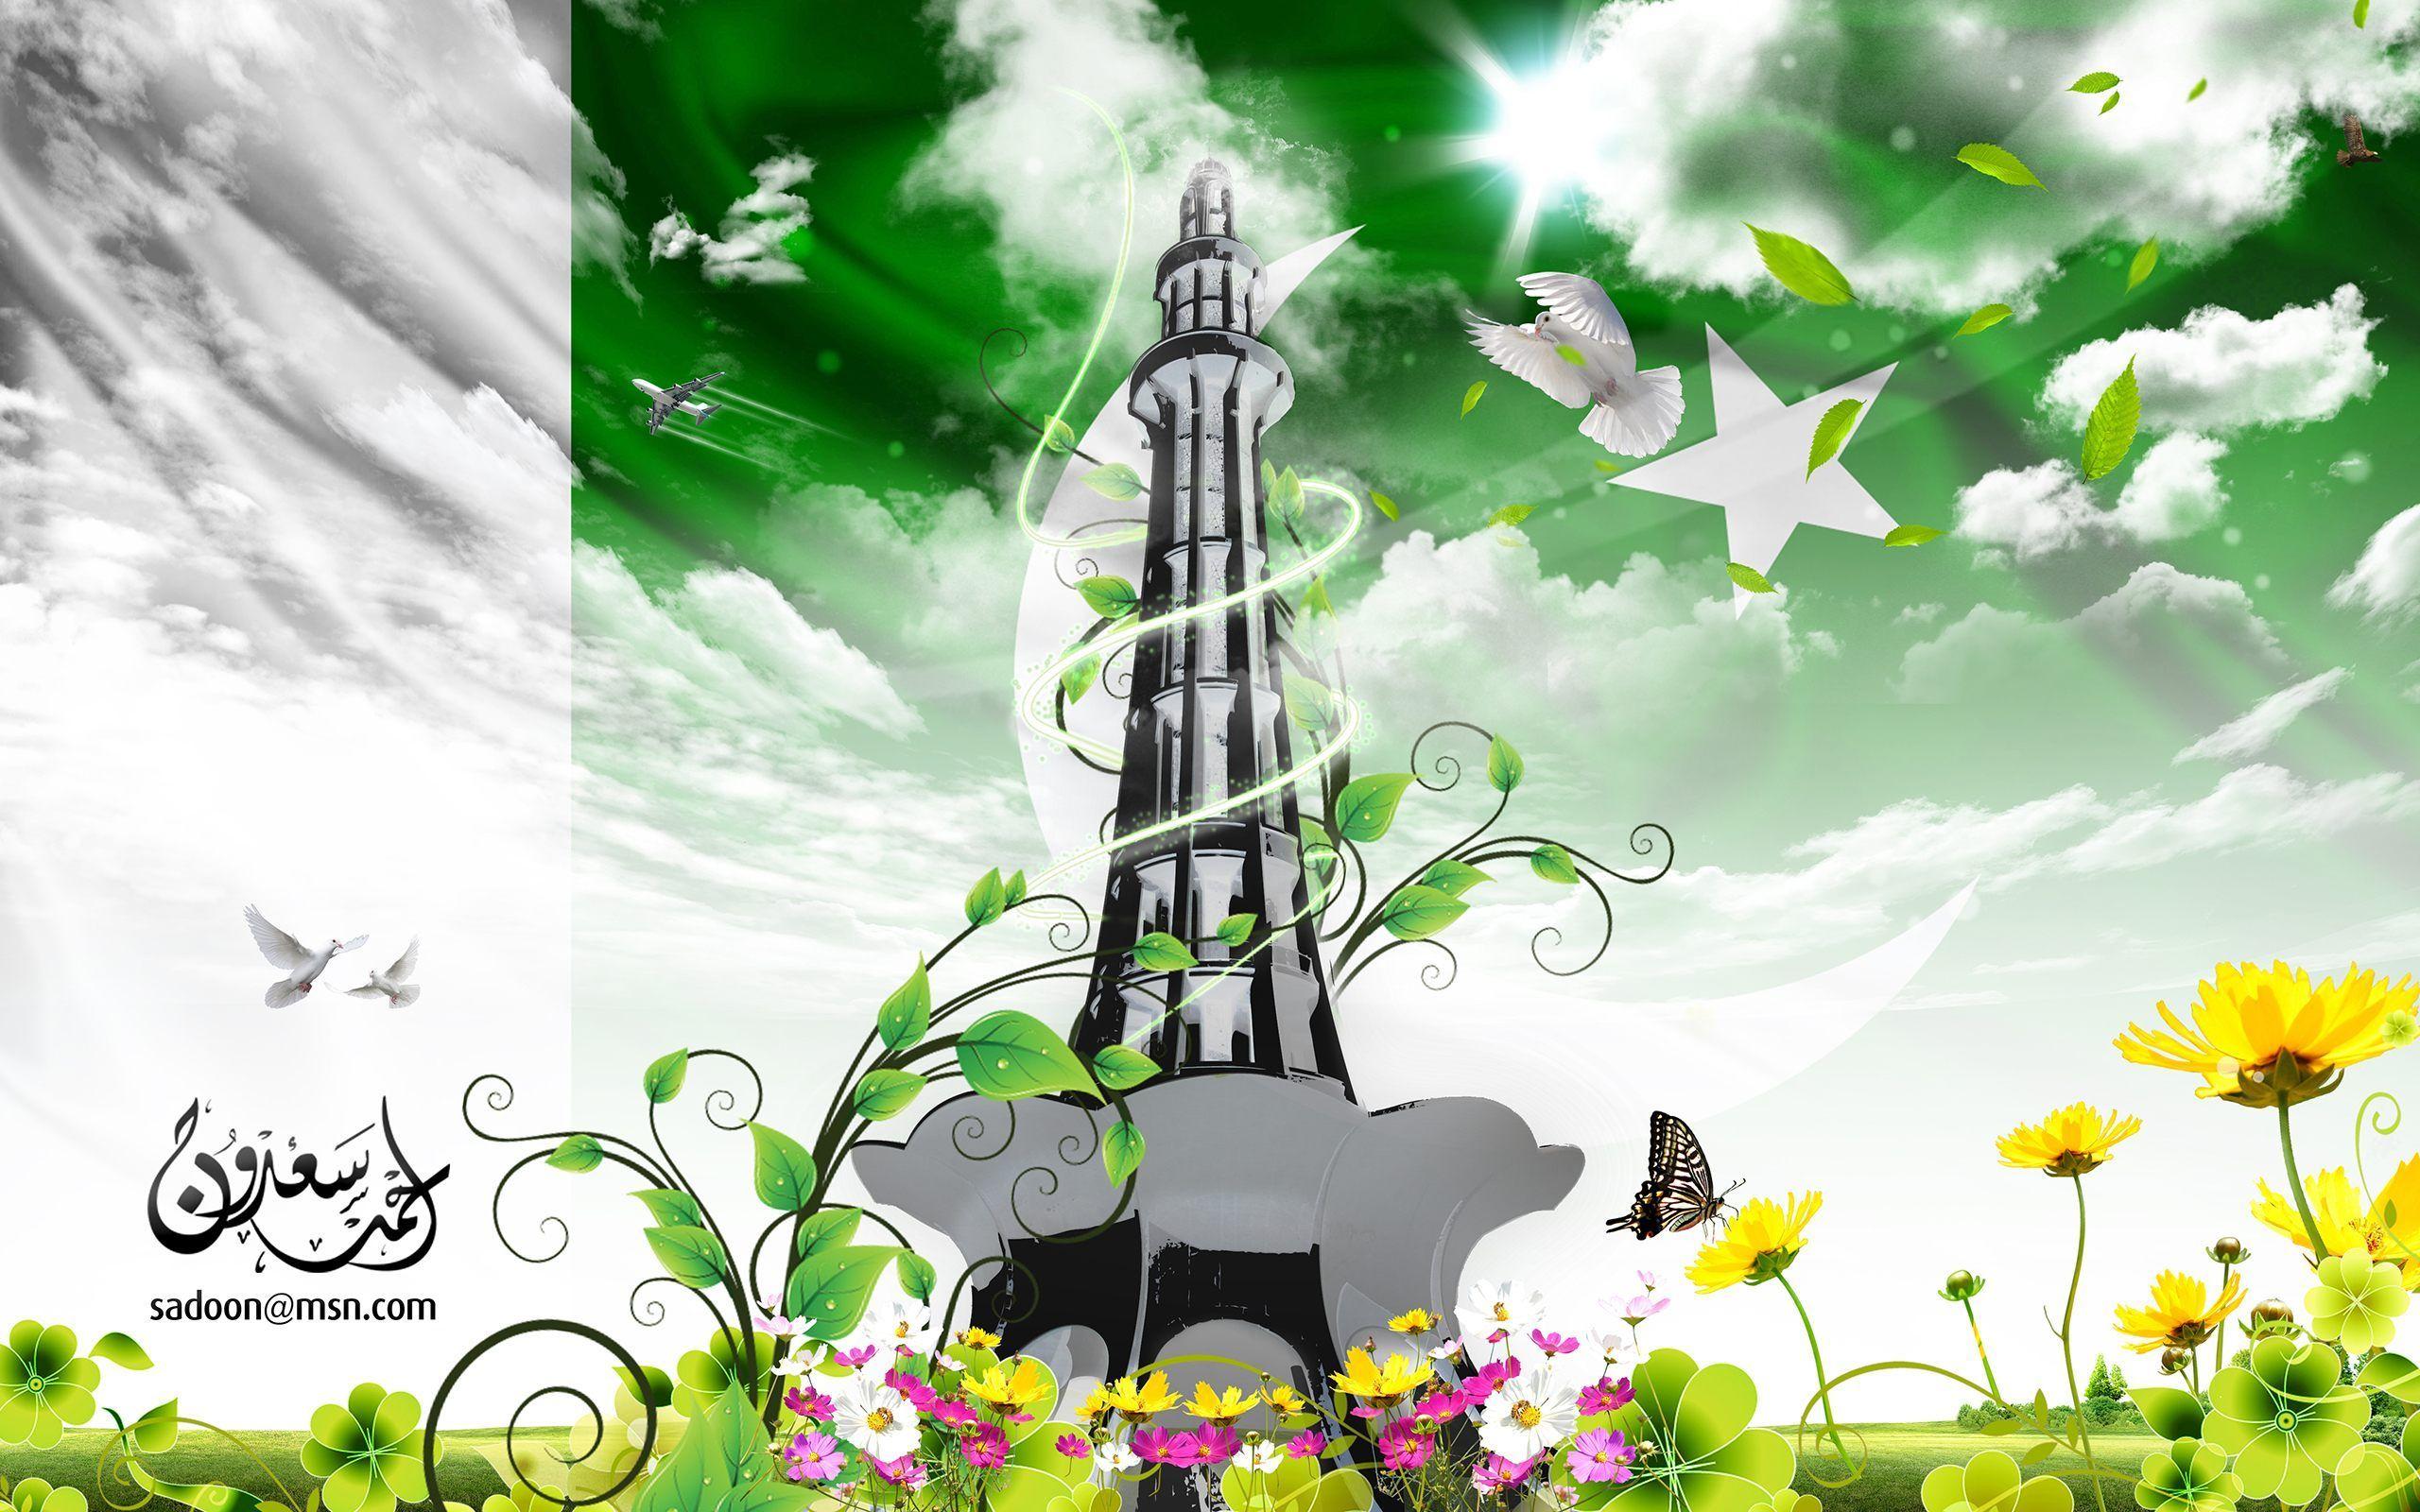 Pakistan Flag Wallpaper Android Apps on Google Play. HD Wallpaper